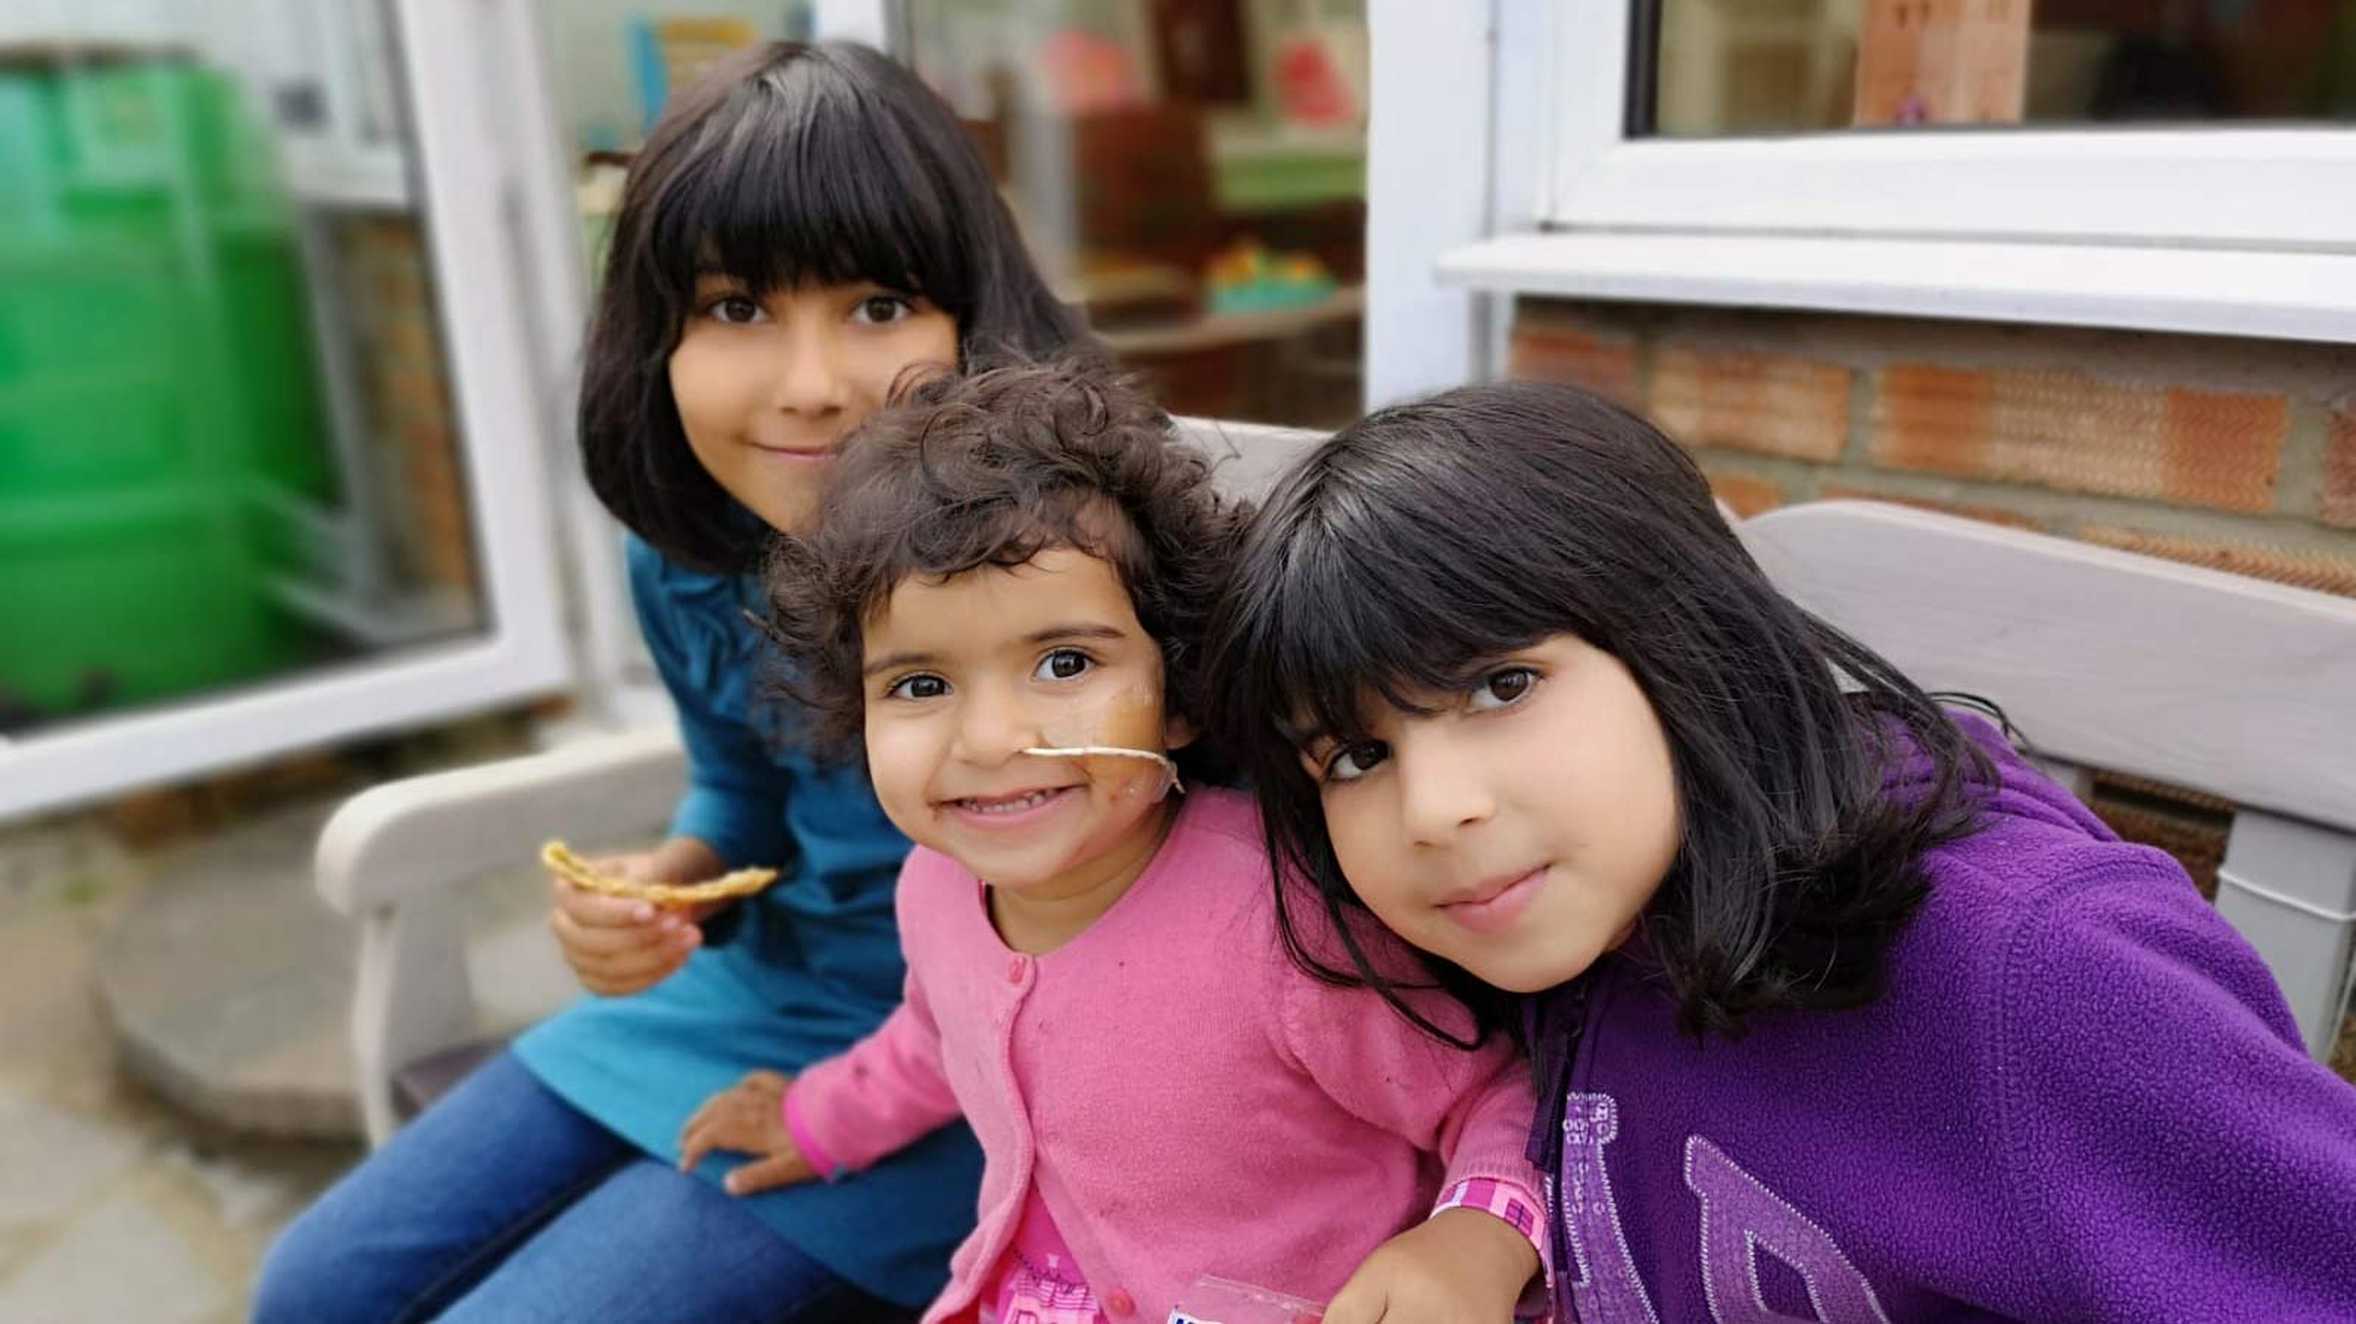 Sophia and her sisters sitting together on a garden bench.